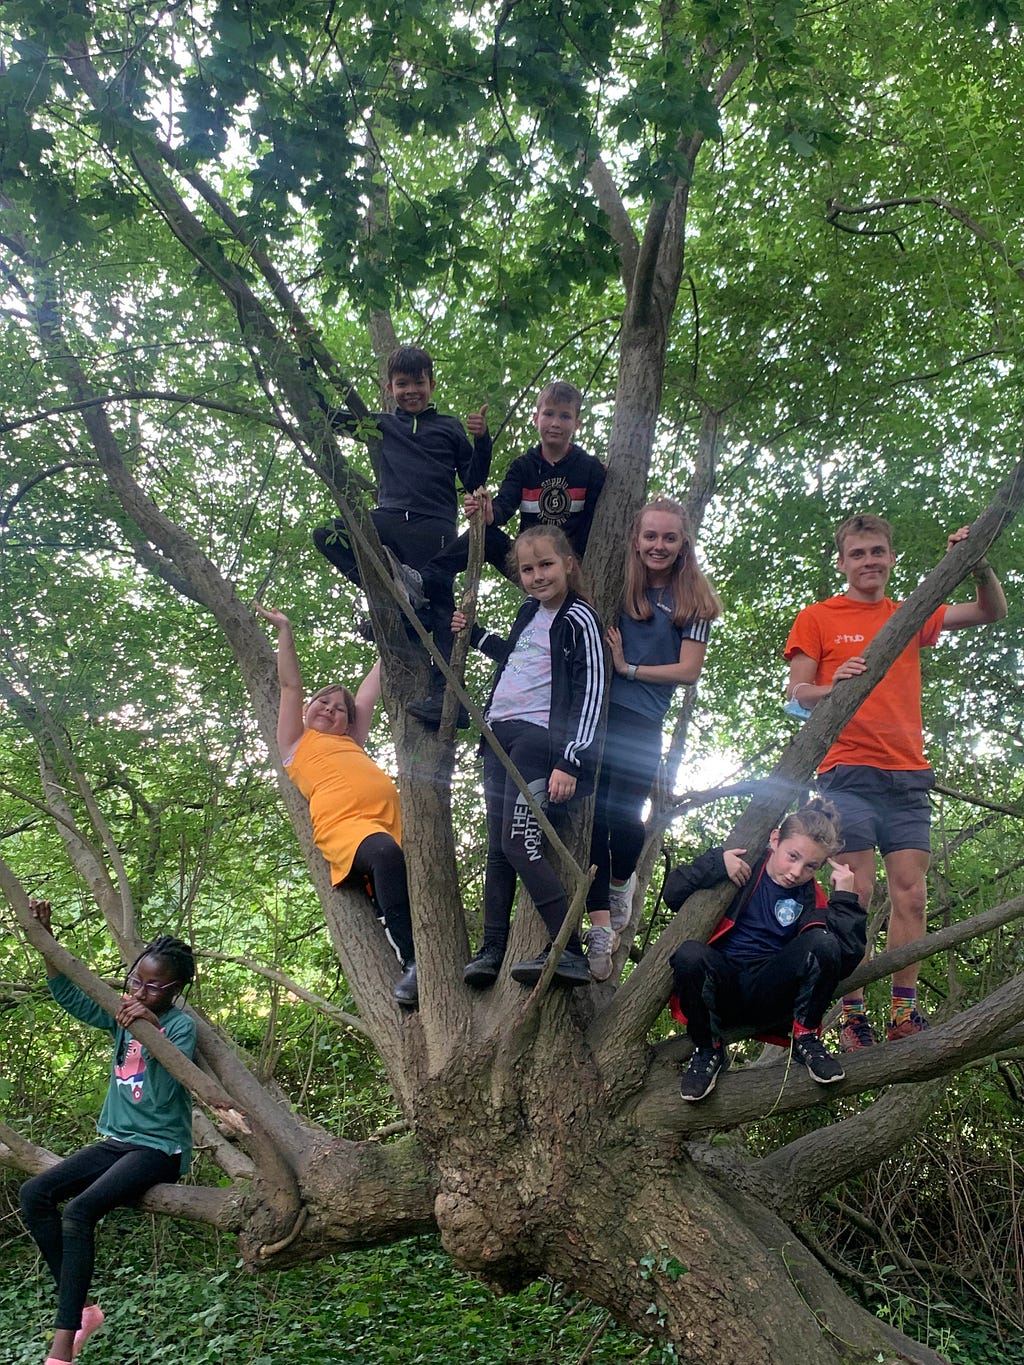 6 children and 2 volunteers climbing a tree, looking at the camera